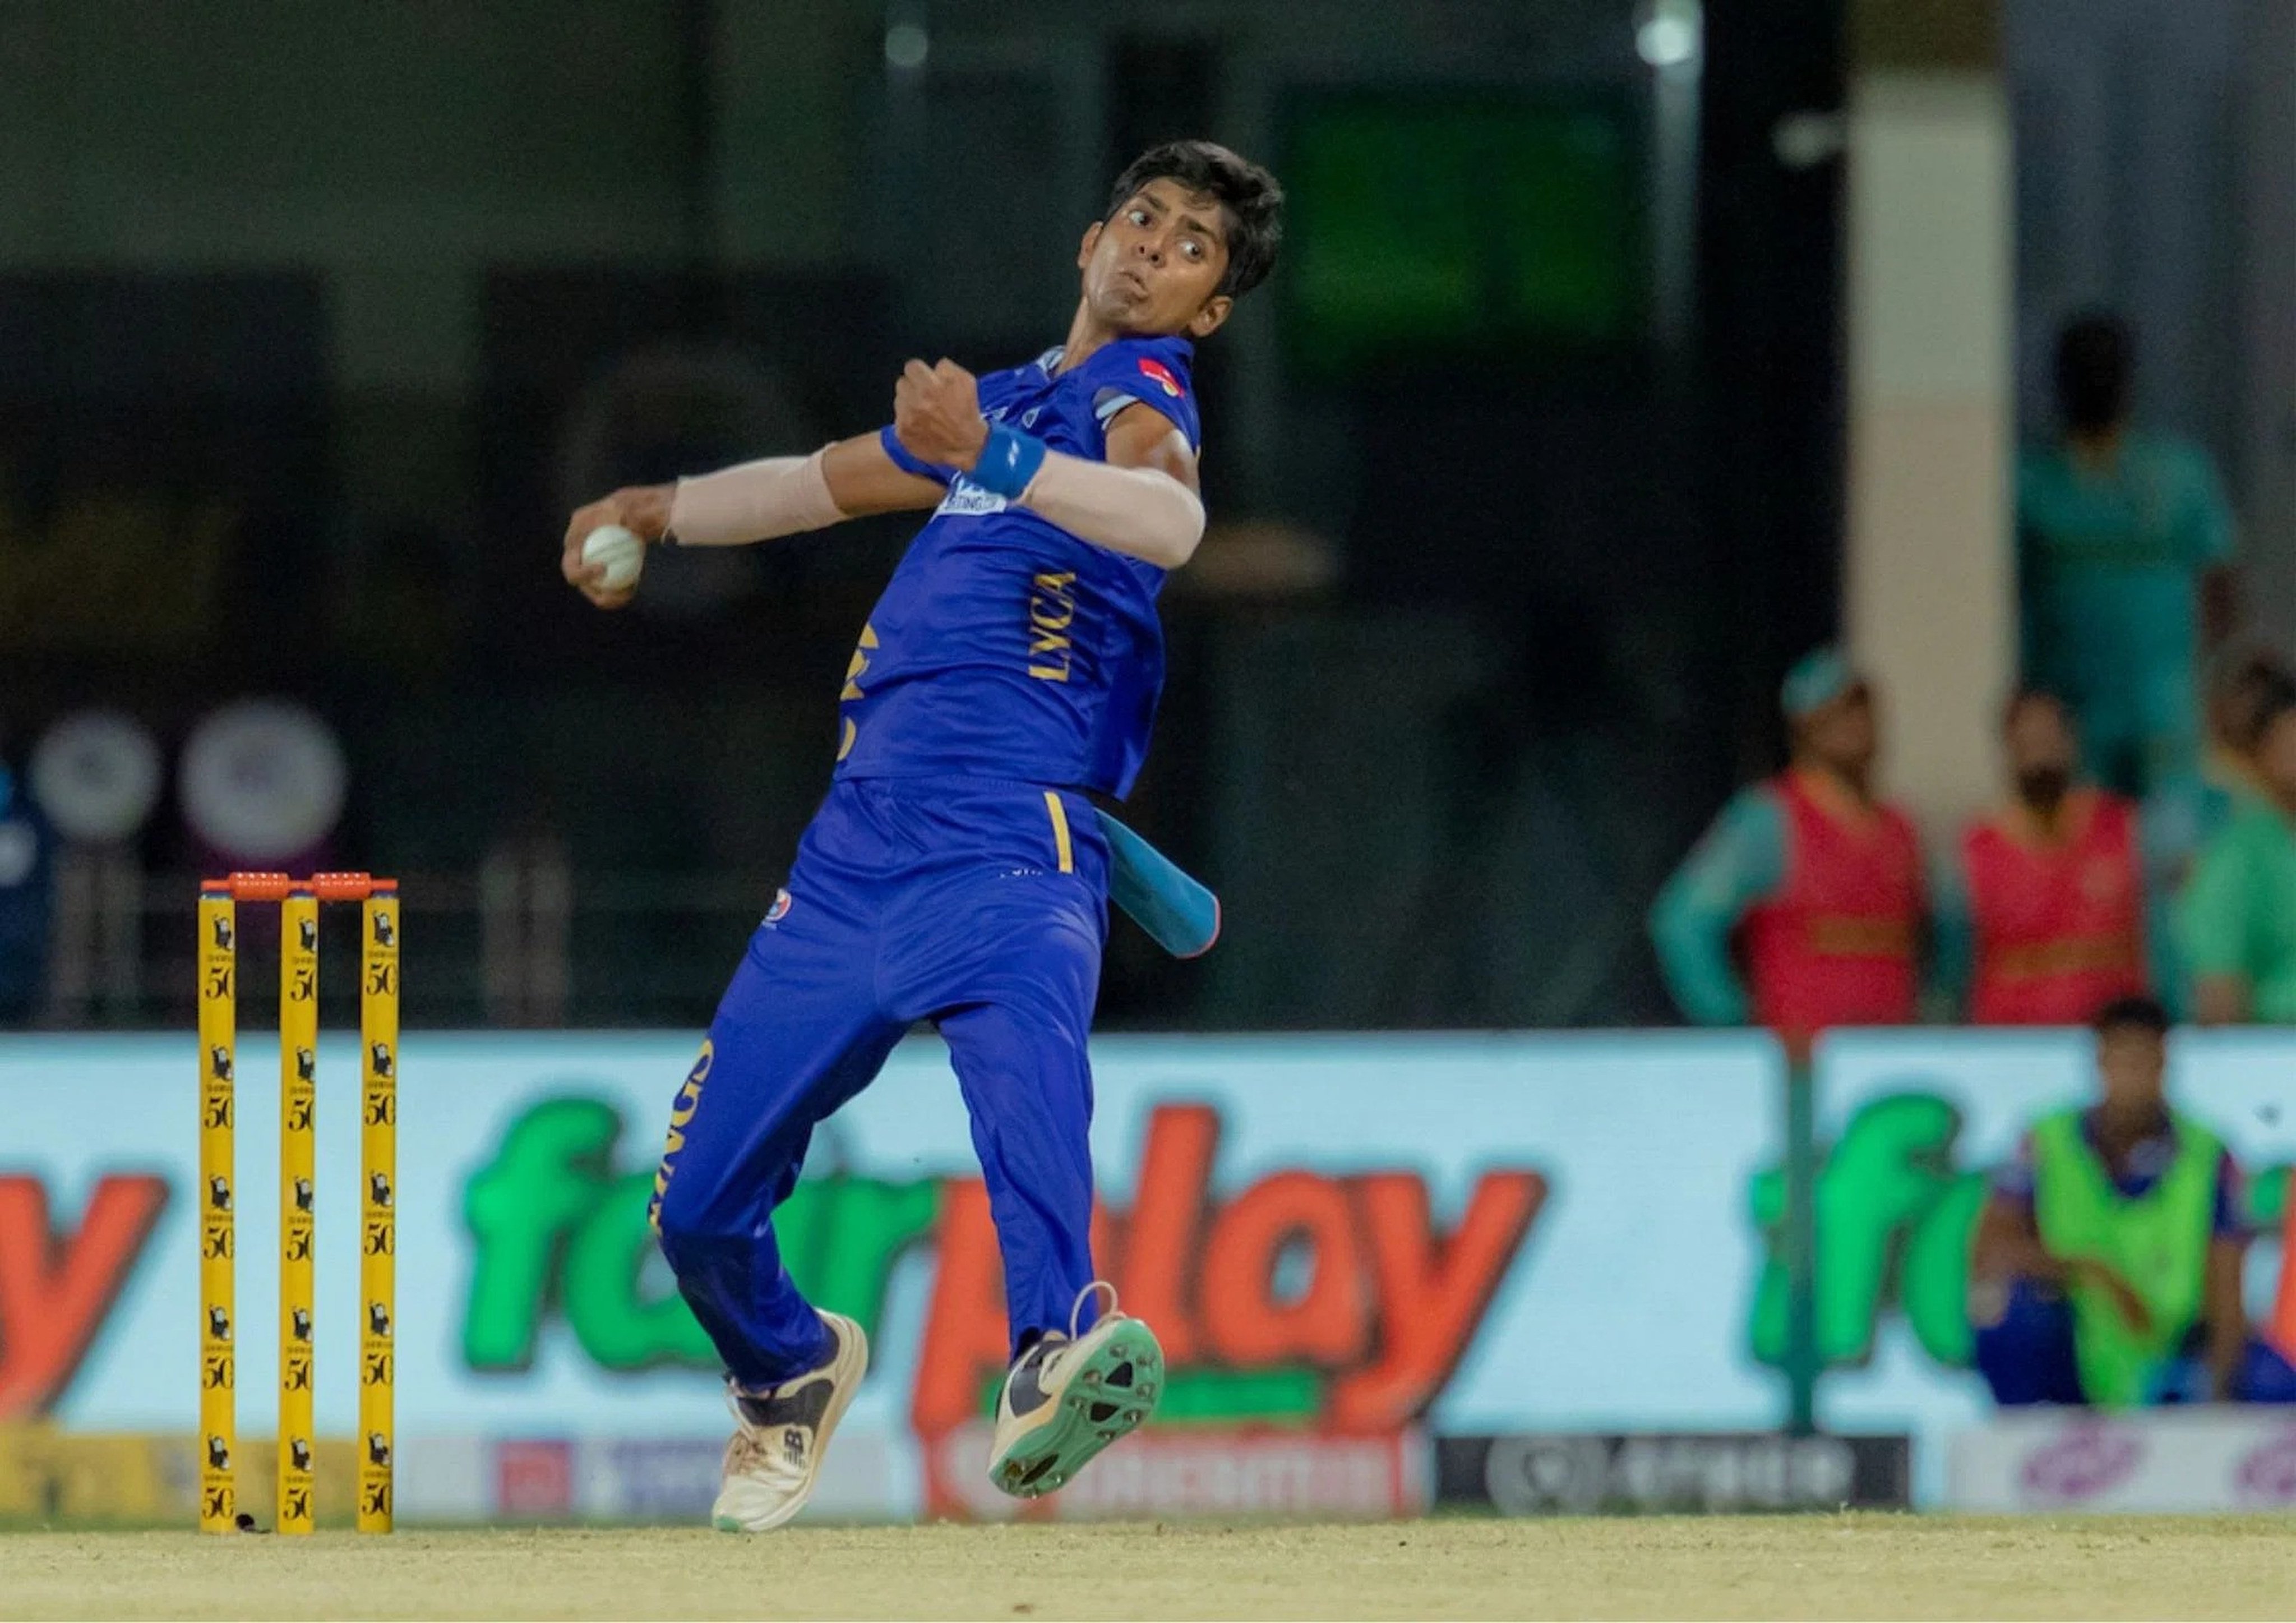 Jhathavedh Subramanyan, who was born and raised in the city, in December became Hong Kong’s first cricketer to go under the hammer at an IPL auction. Photo: TNPL